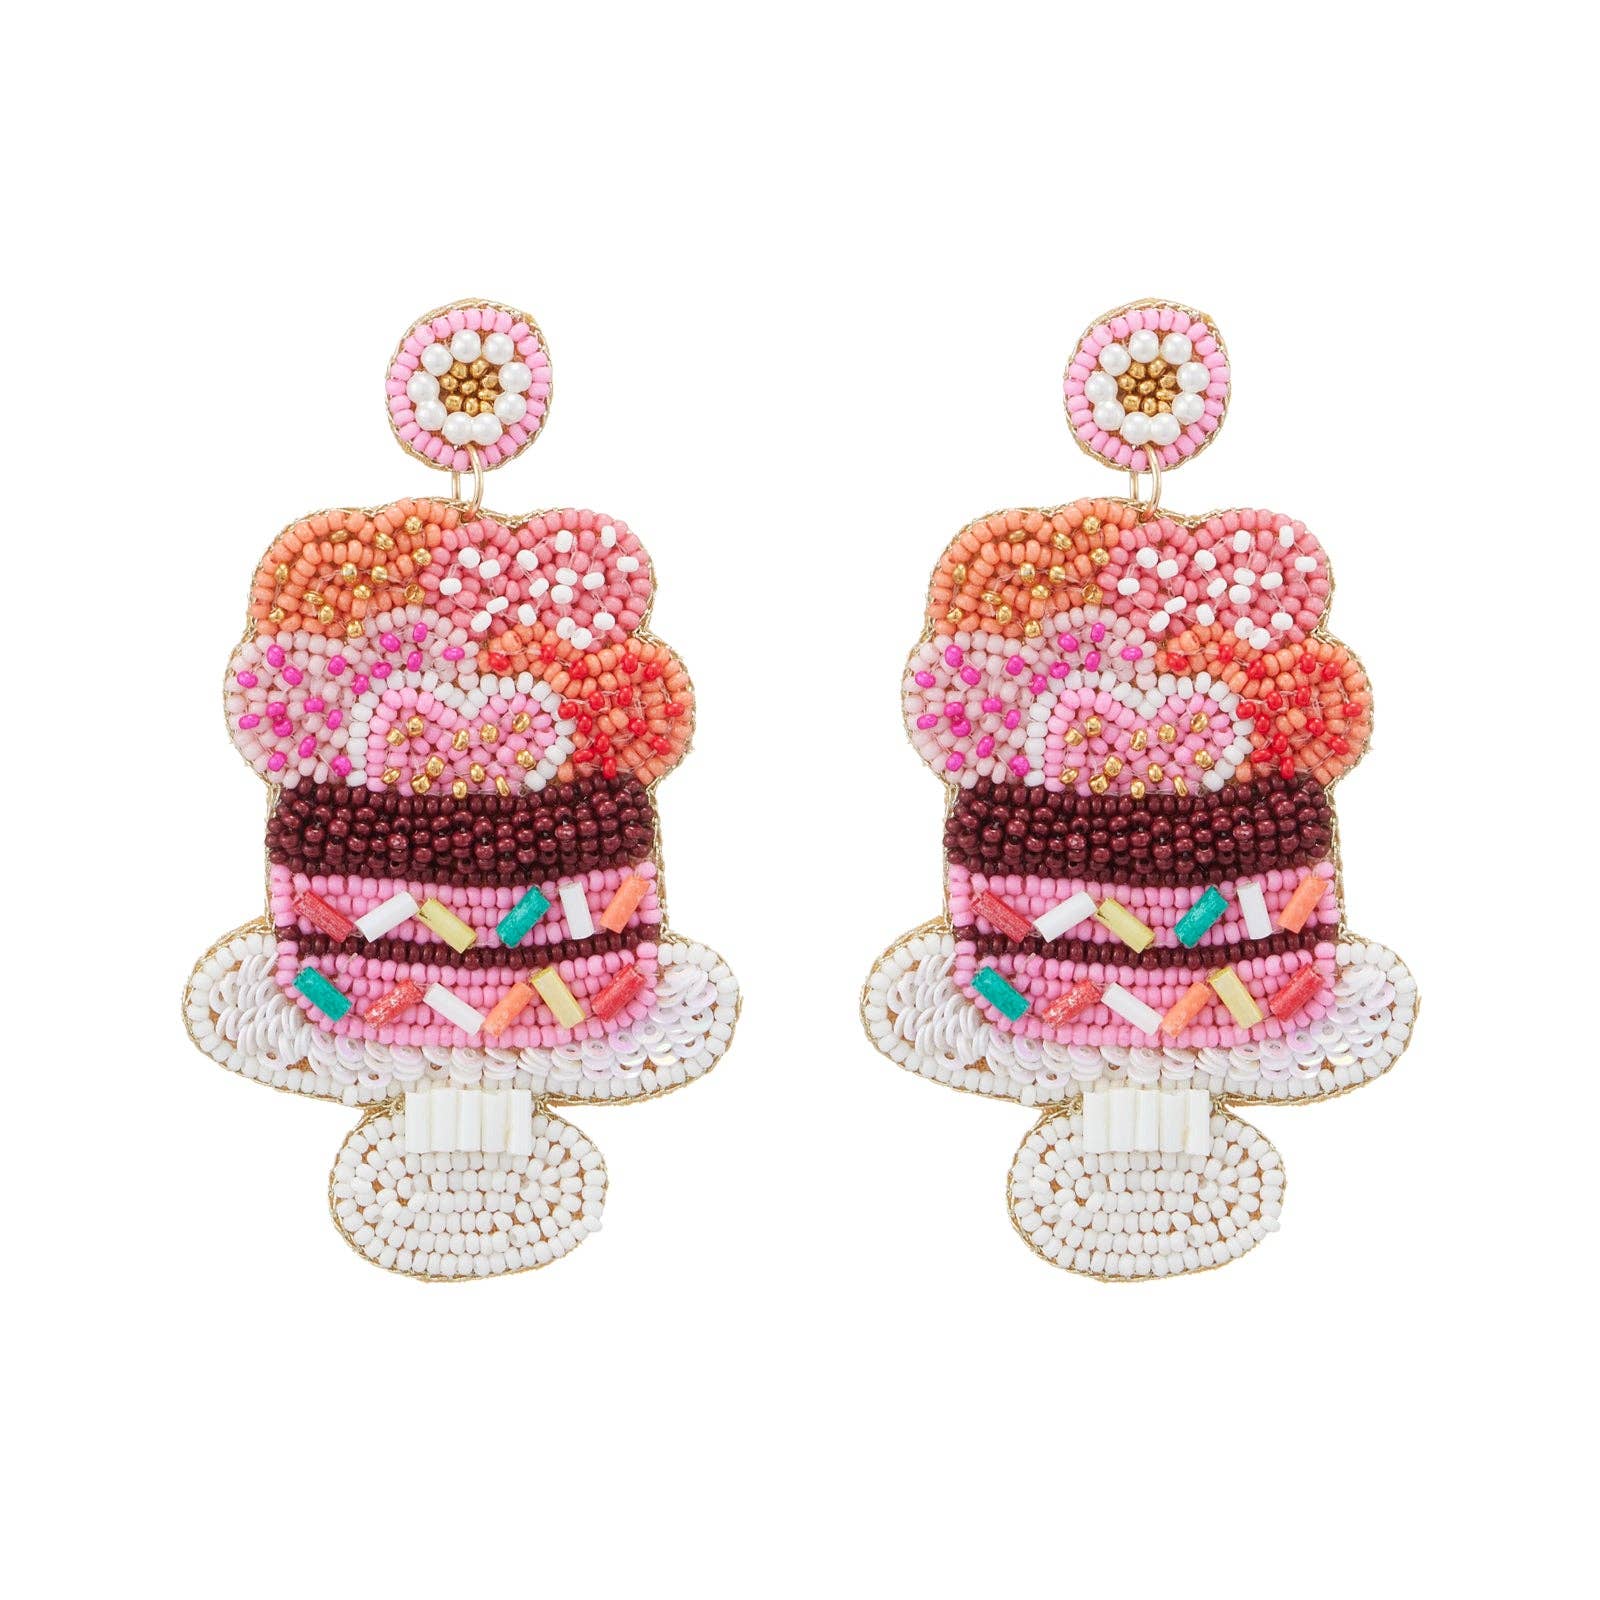 Valentine's Day Cake Seed Beads Earrings